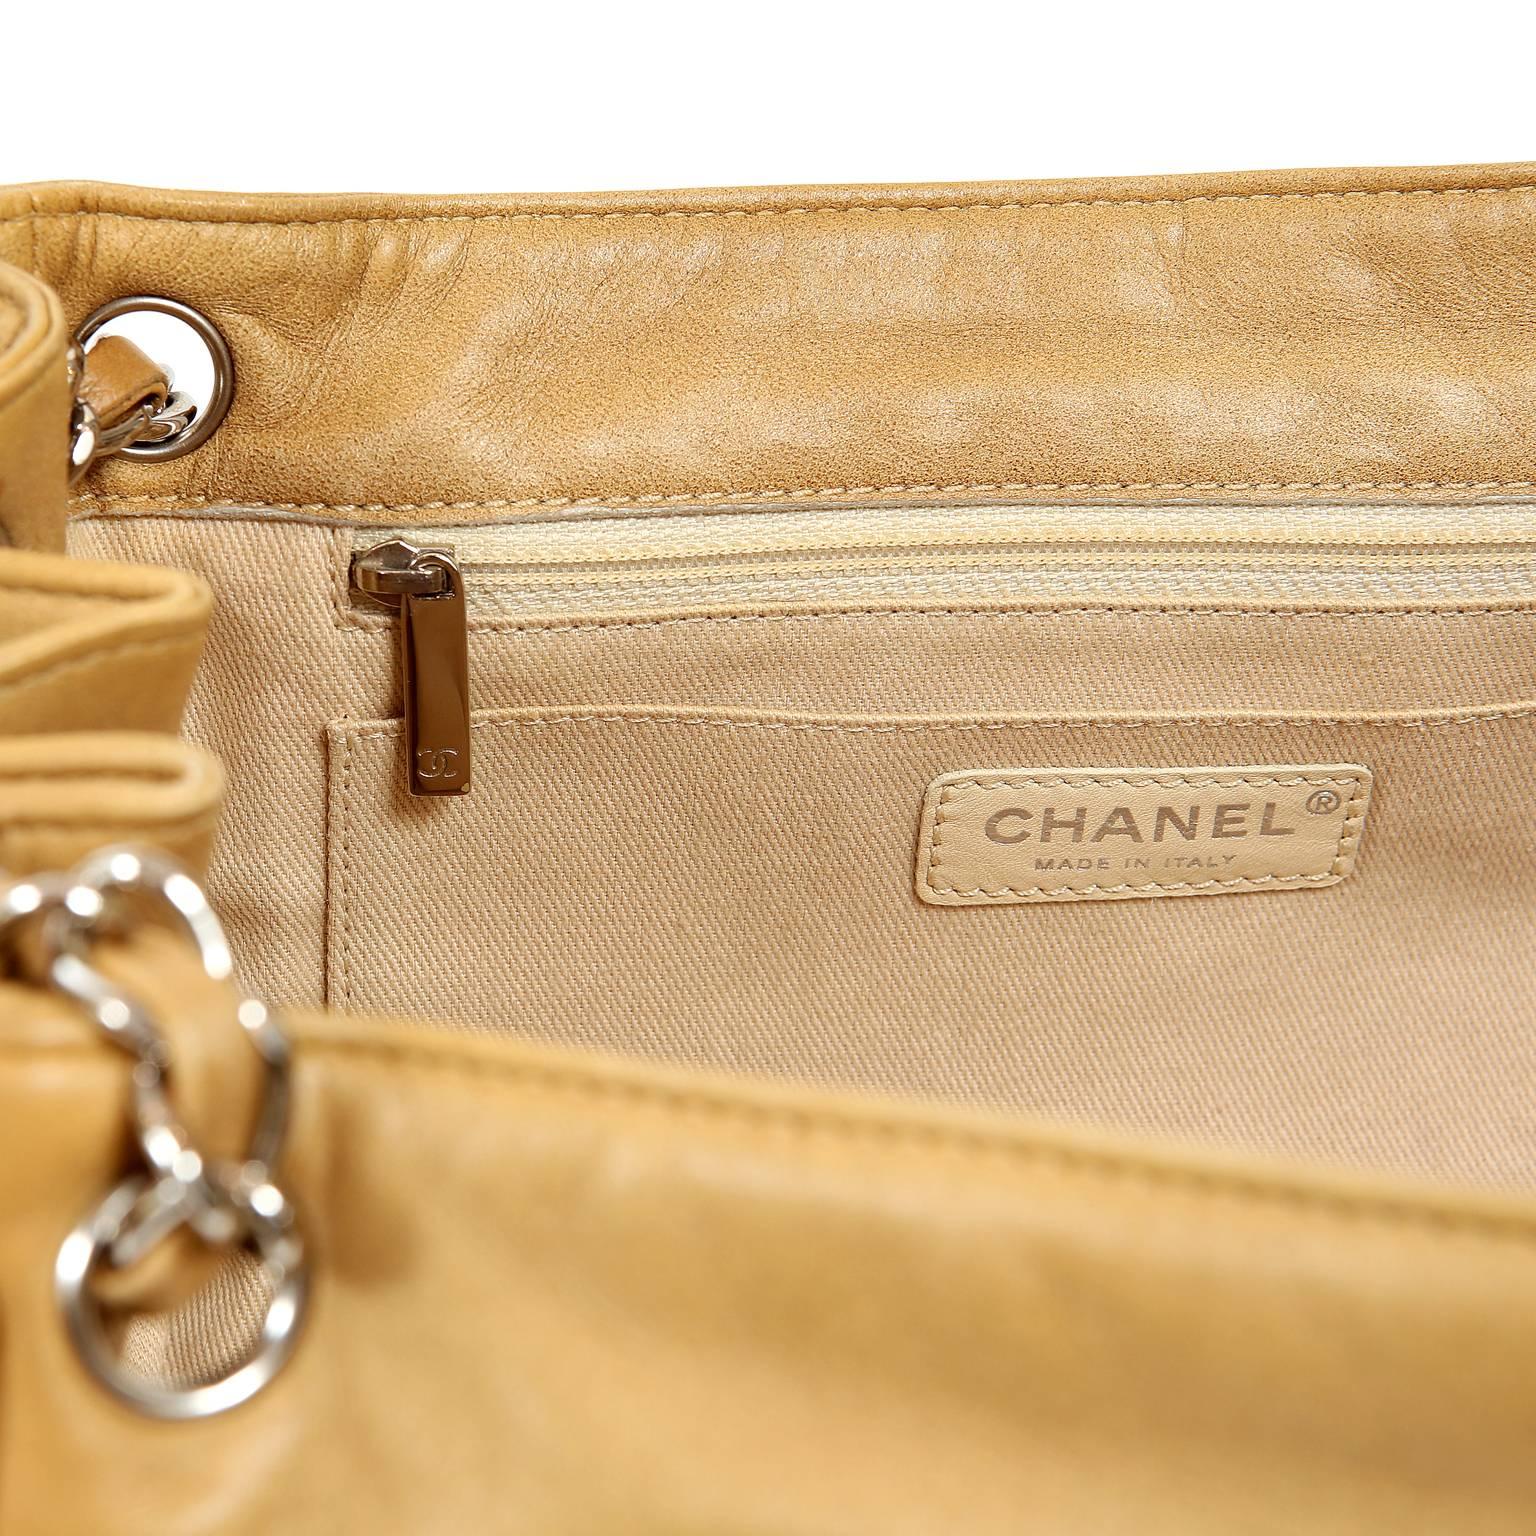 Chanel Beige Leather Accordion Flap Bag For Sale 5